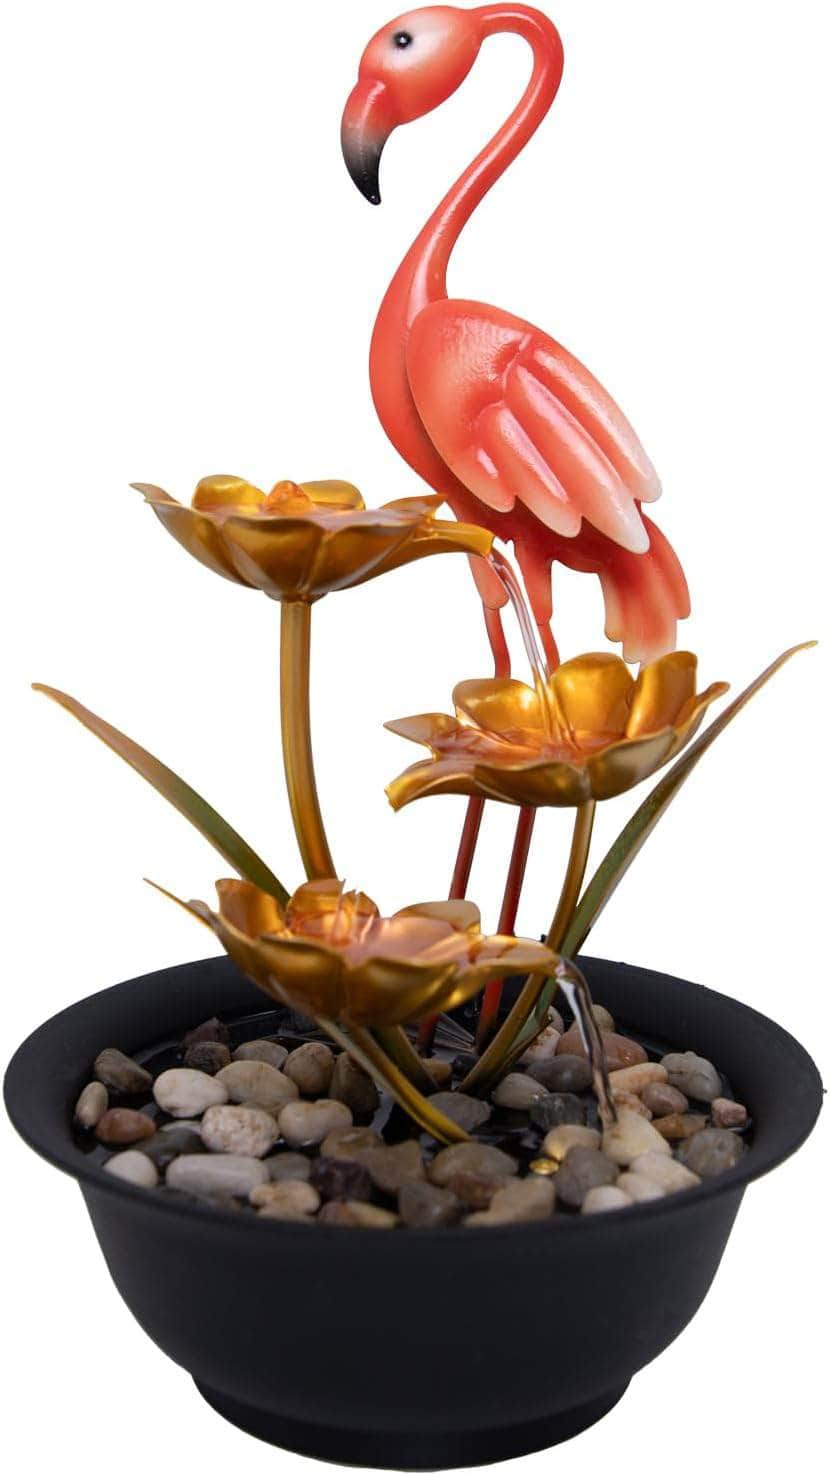 Ferrisland Tabletop Fountain Indoor with LED Lights, Flamingo & Lotus 14" 3-Tier Water Fountain with Submersible Pump, Metal Lightweight Compact Desktop Fountain & Decoration for Home Bedroom Office Ferrisland